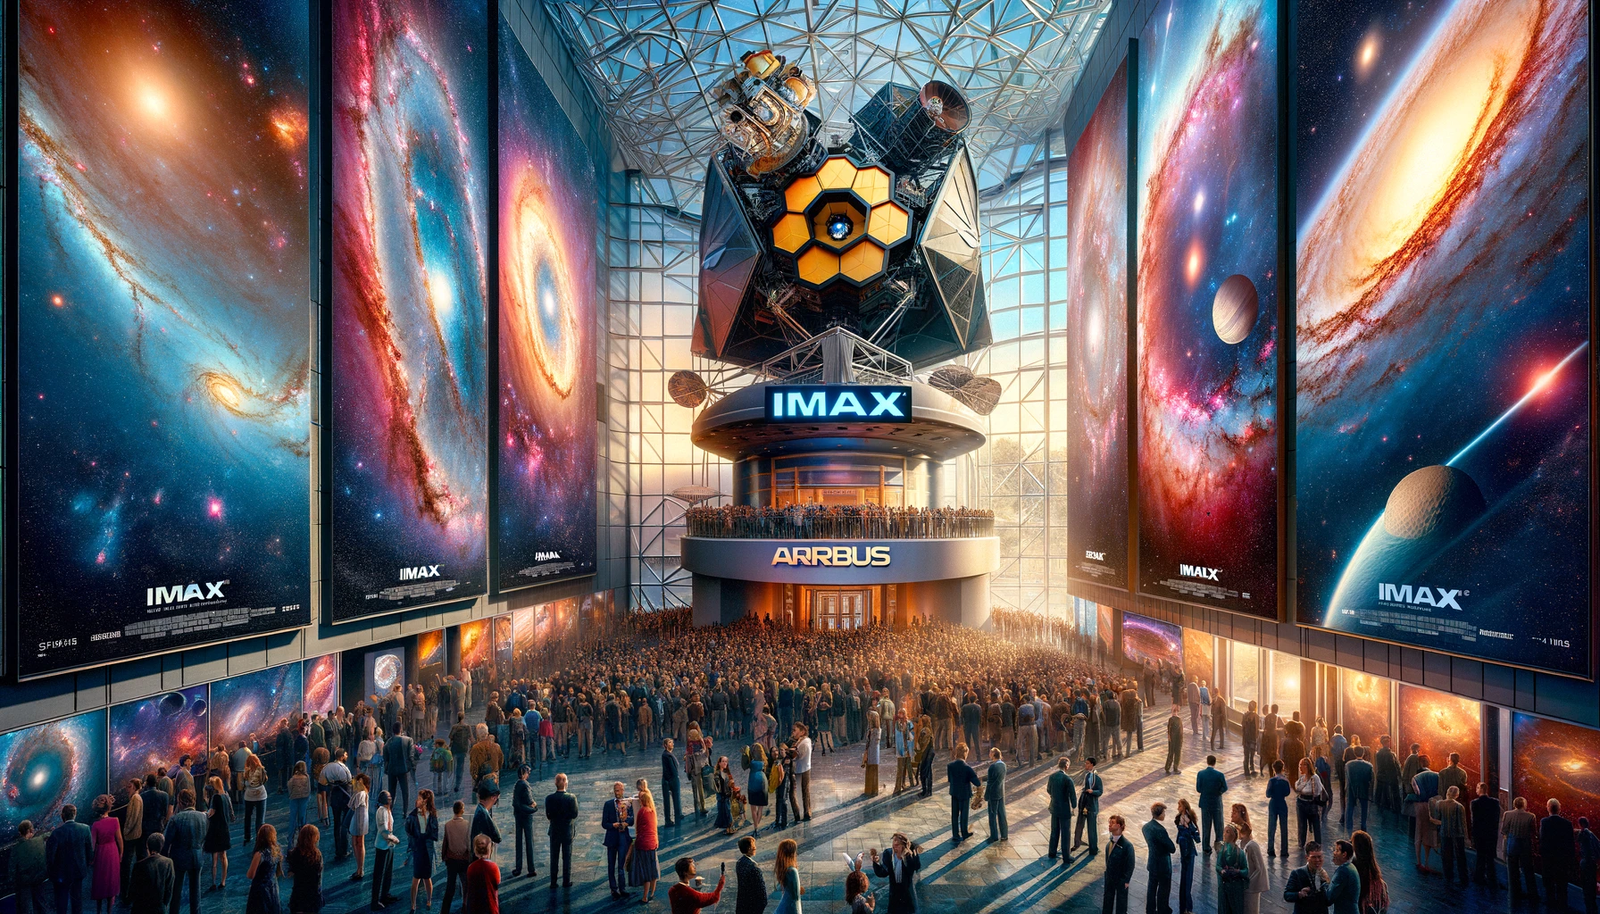 Excited crowd at the premiere of 'Deep Sky', an IMAX documentary about the James Webb Space Telescope, outside the Airbus IMAX Theater at the Smithsonian's National Air and Space Museum.